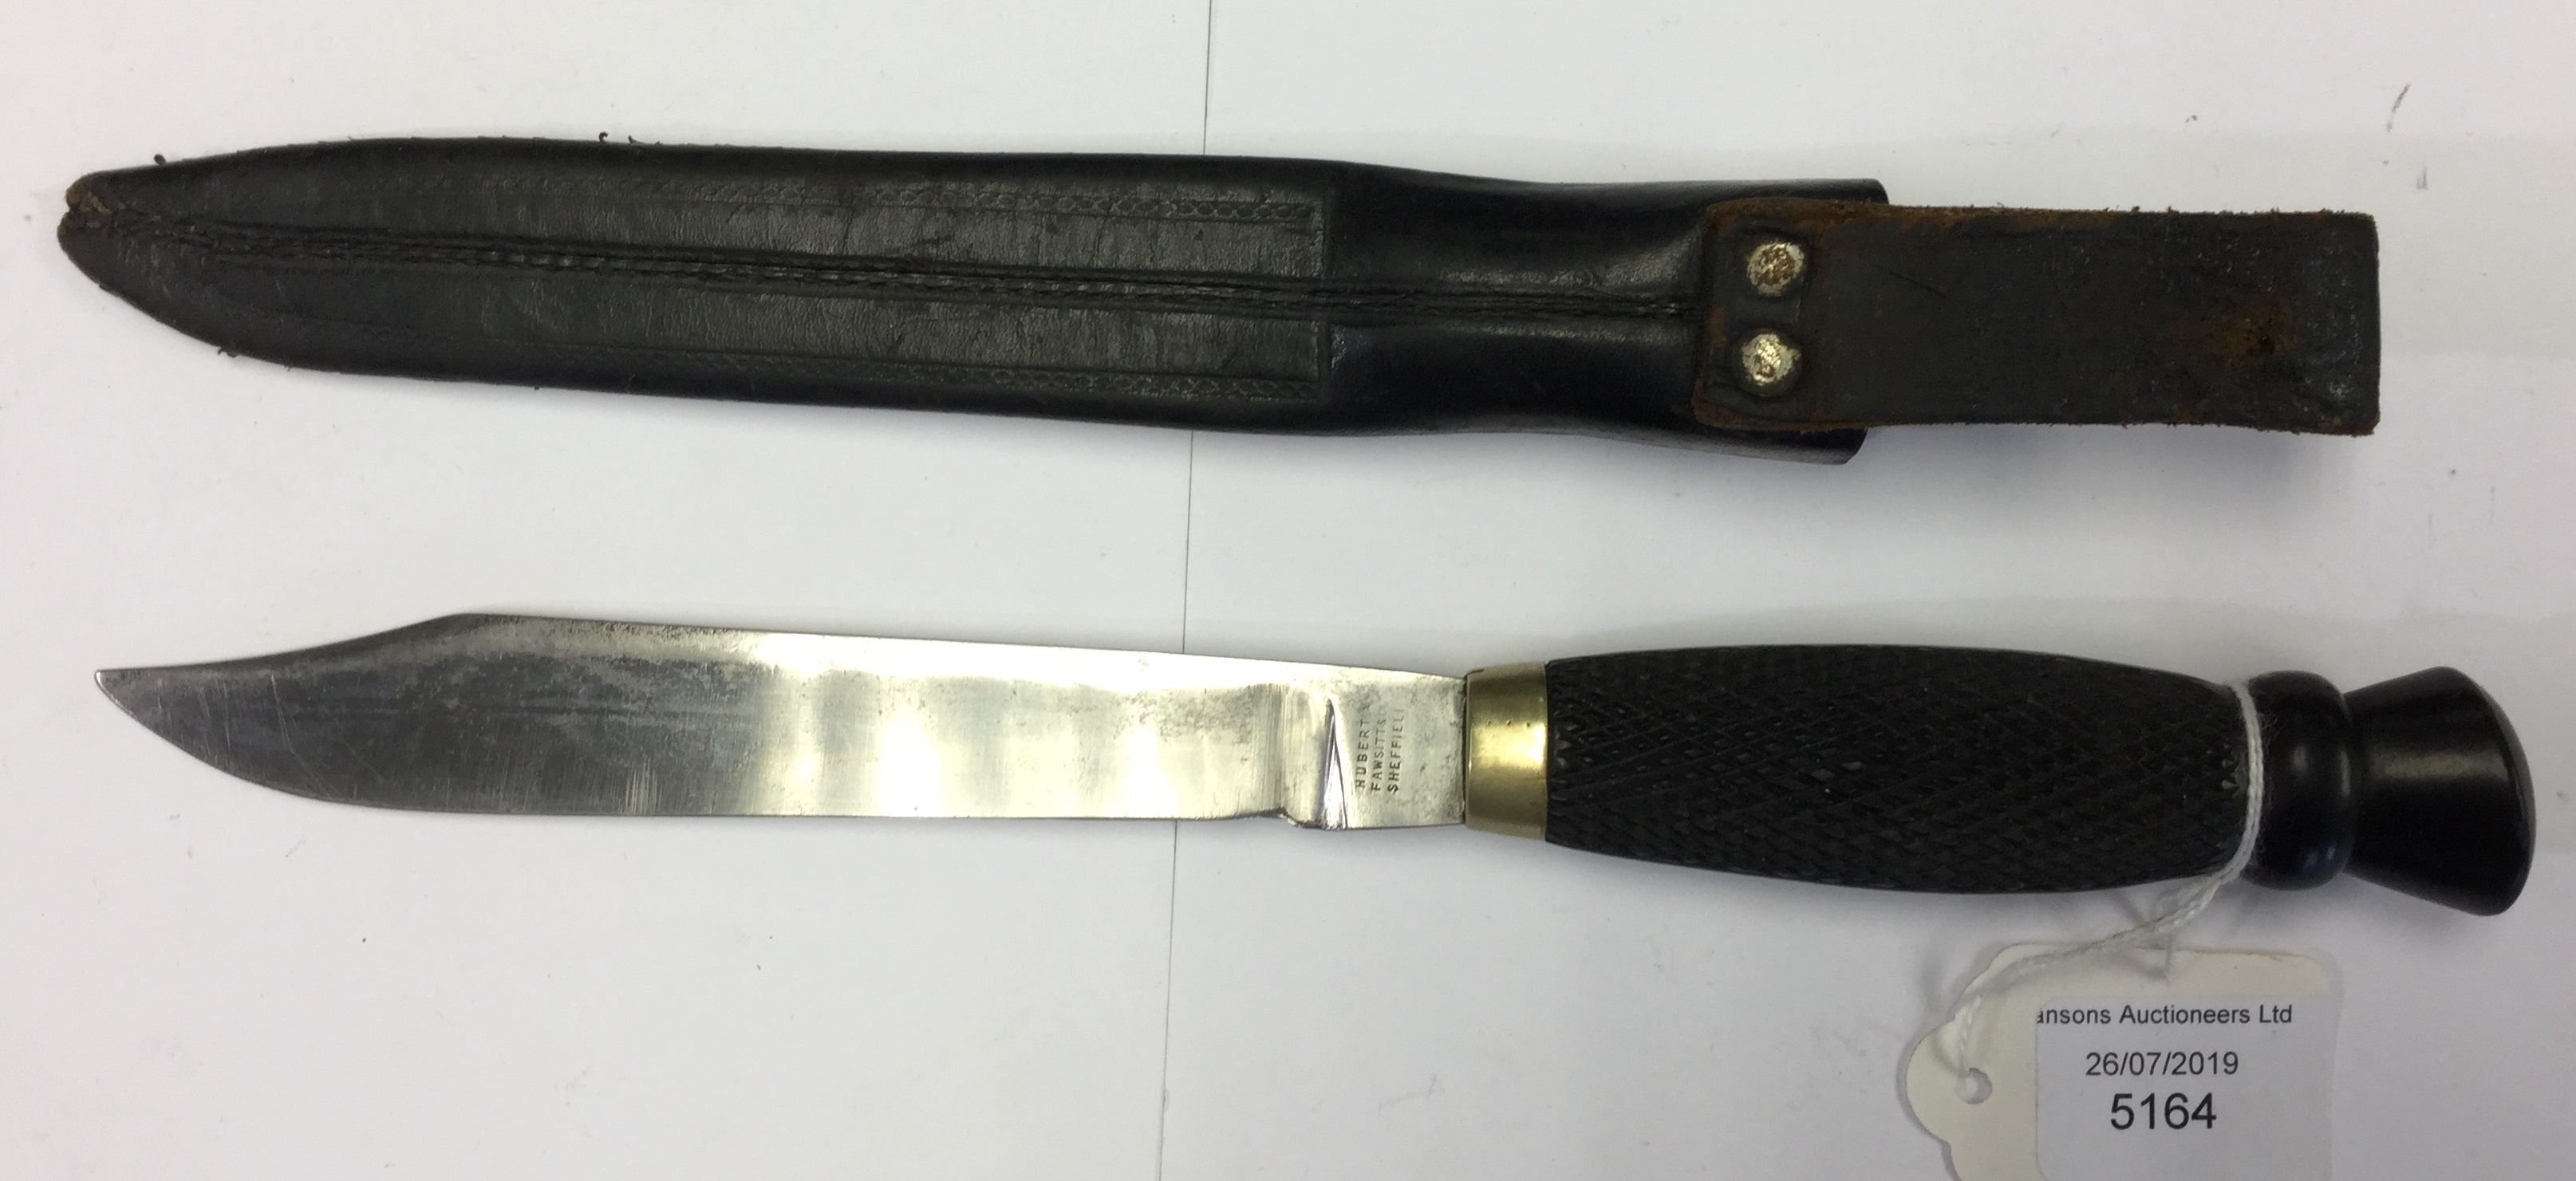 Early 20th Century Hunting knife with 155mm long Bowie type blade by "Hubert Fawsitt & Co,